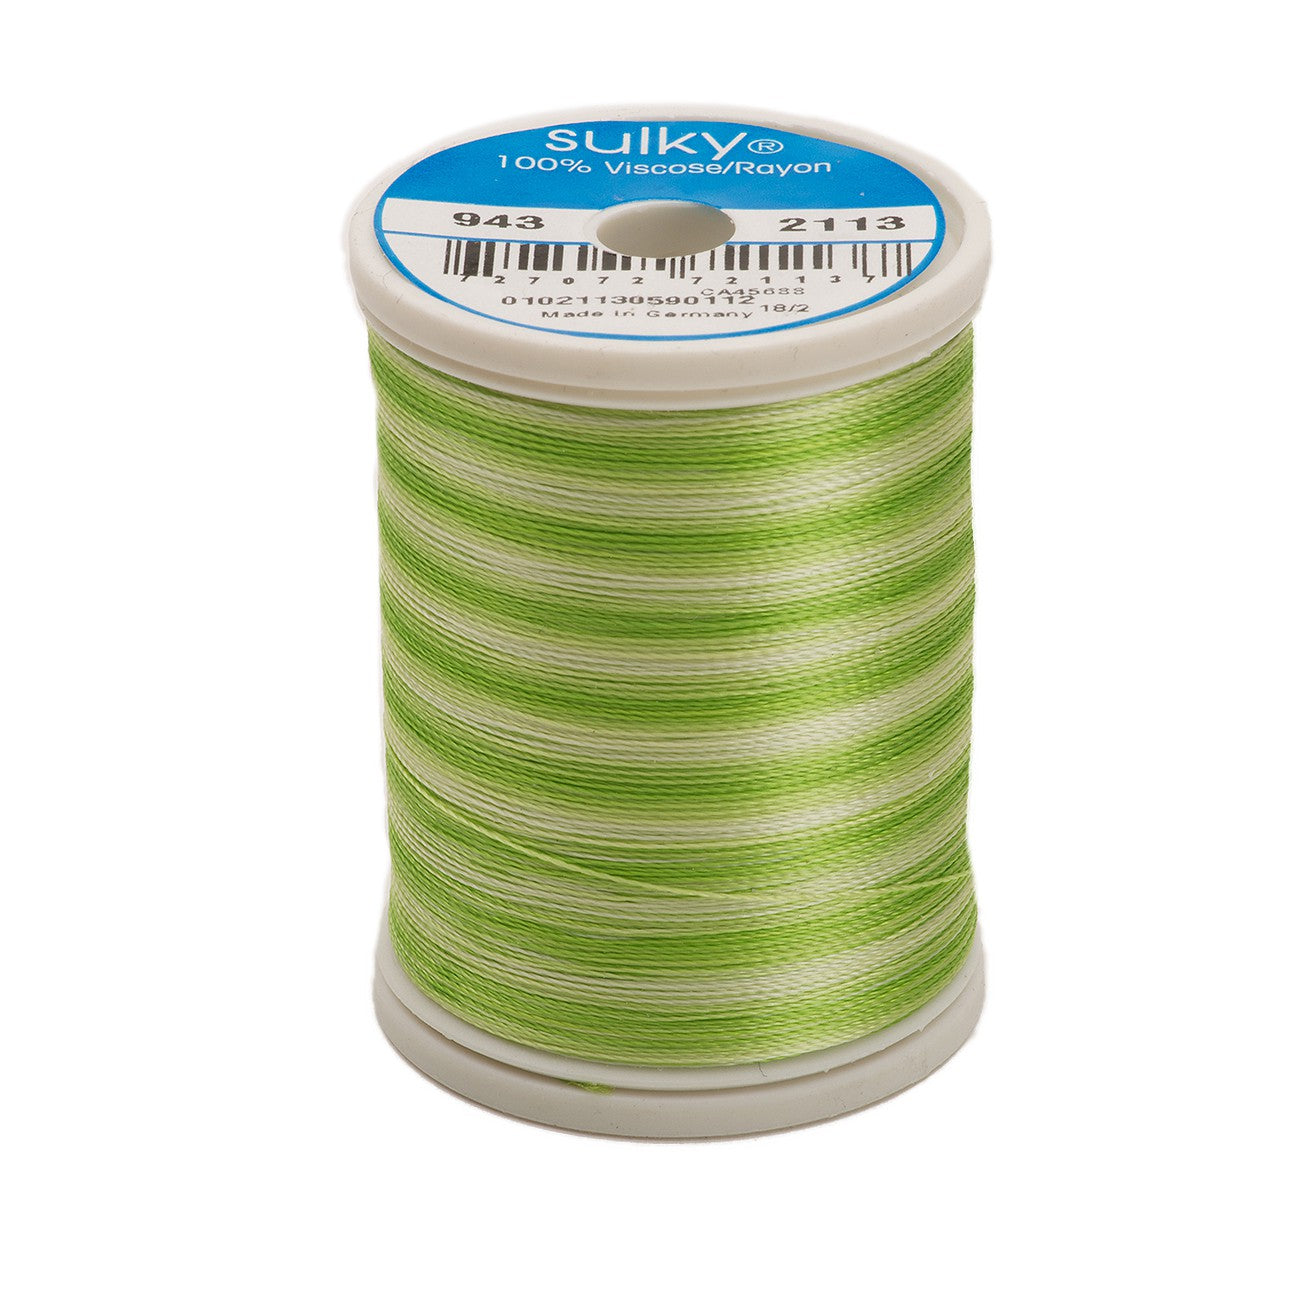 Sulky Variegated 40wt Rayon Thread 2113 Bright Green   850yd